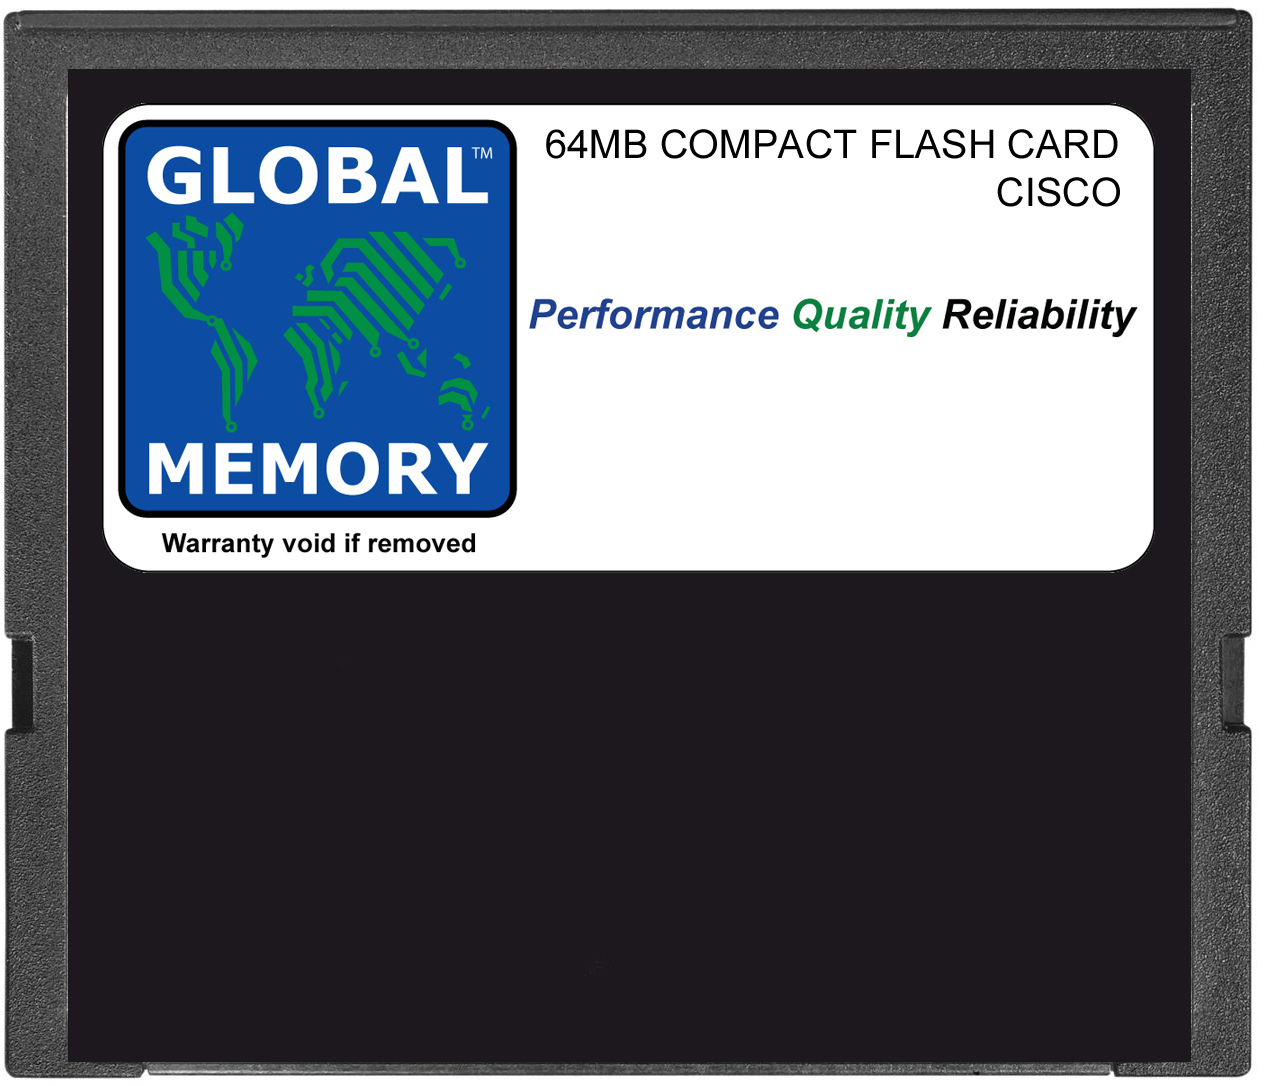 64MB COMPACT FLASH CARD MEMORY FOR CISCO 7200 SERIES ROUTERS NPE-G1 (MEM-NPE-G1-FLD64)